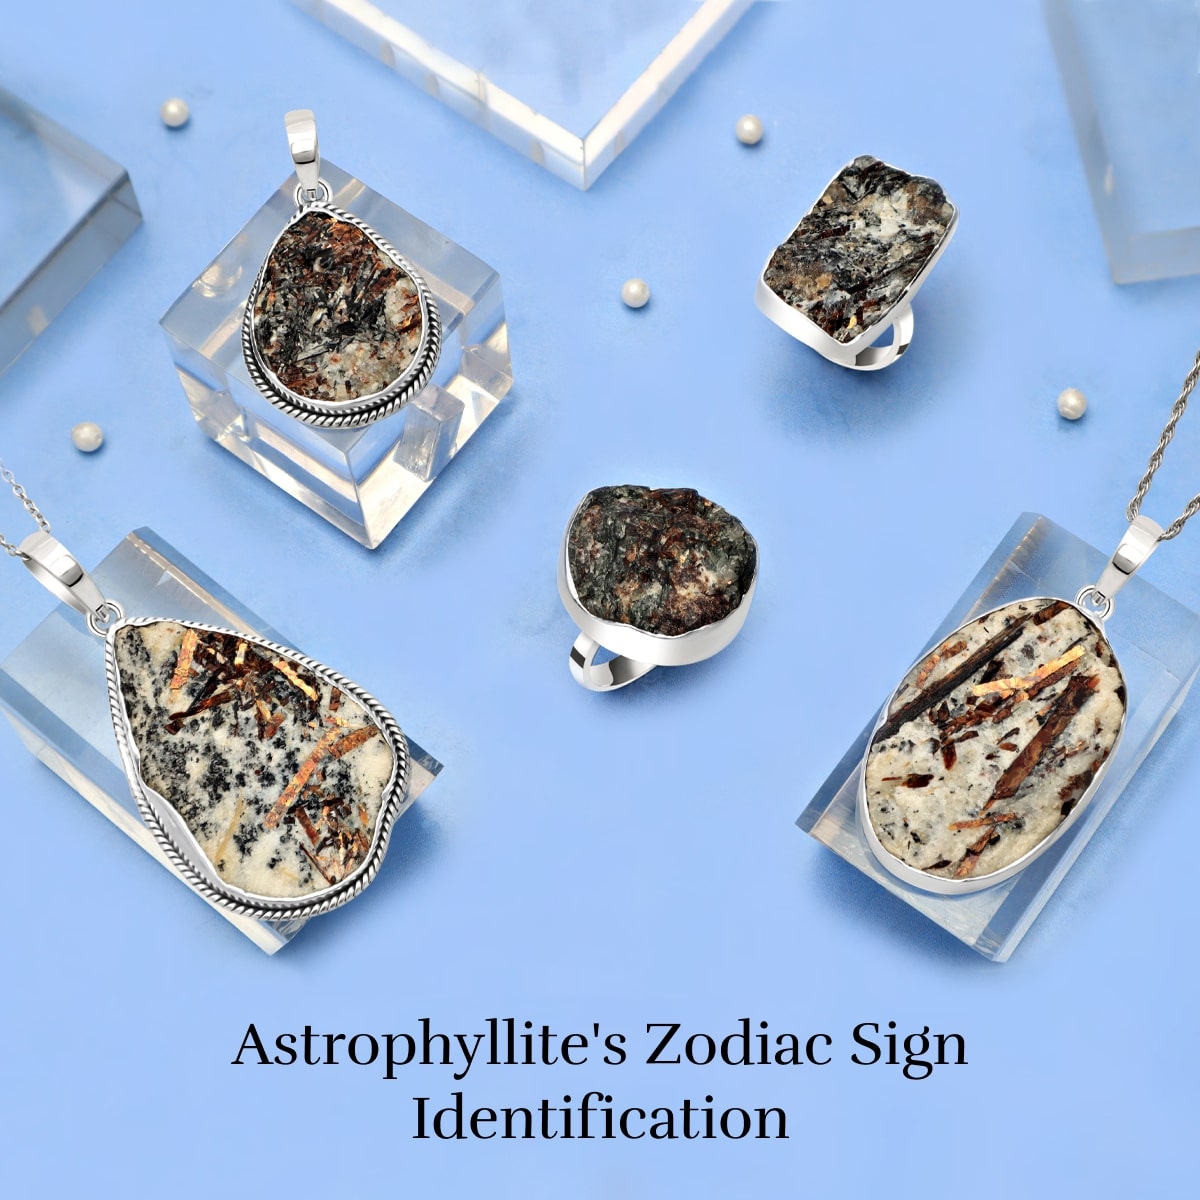 Astrophyllite is Associated with Which Zodiac Sign